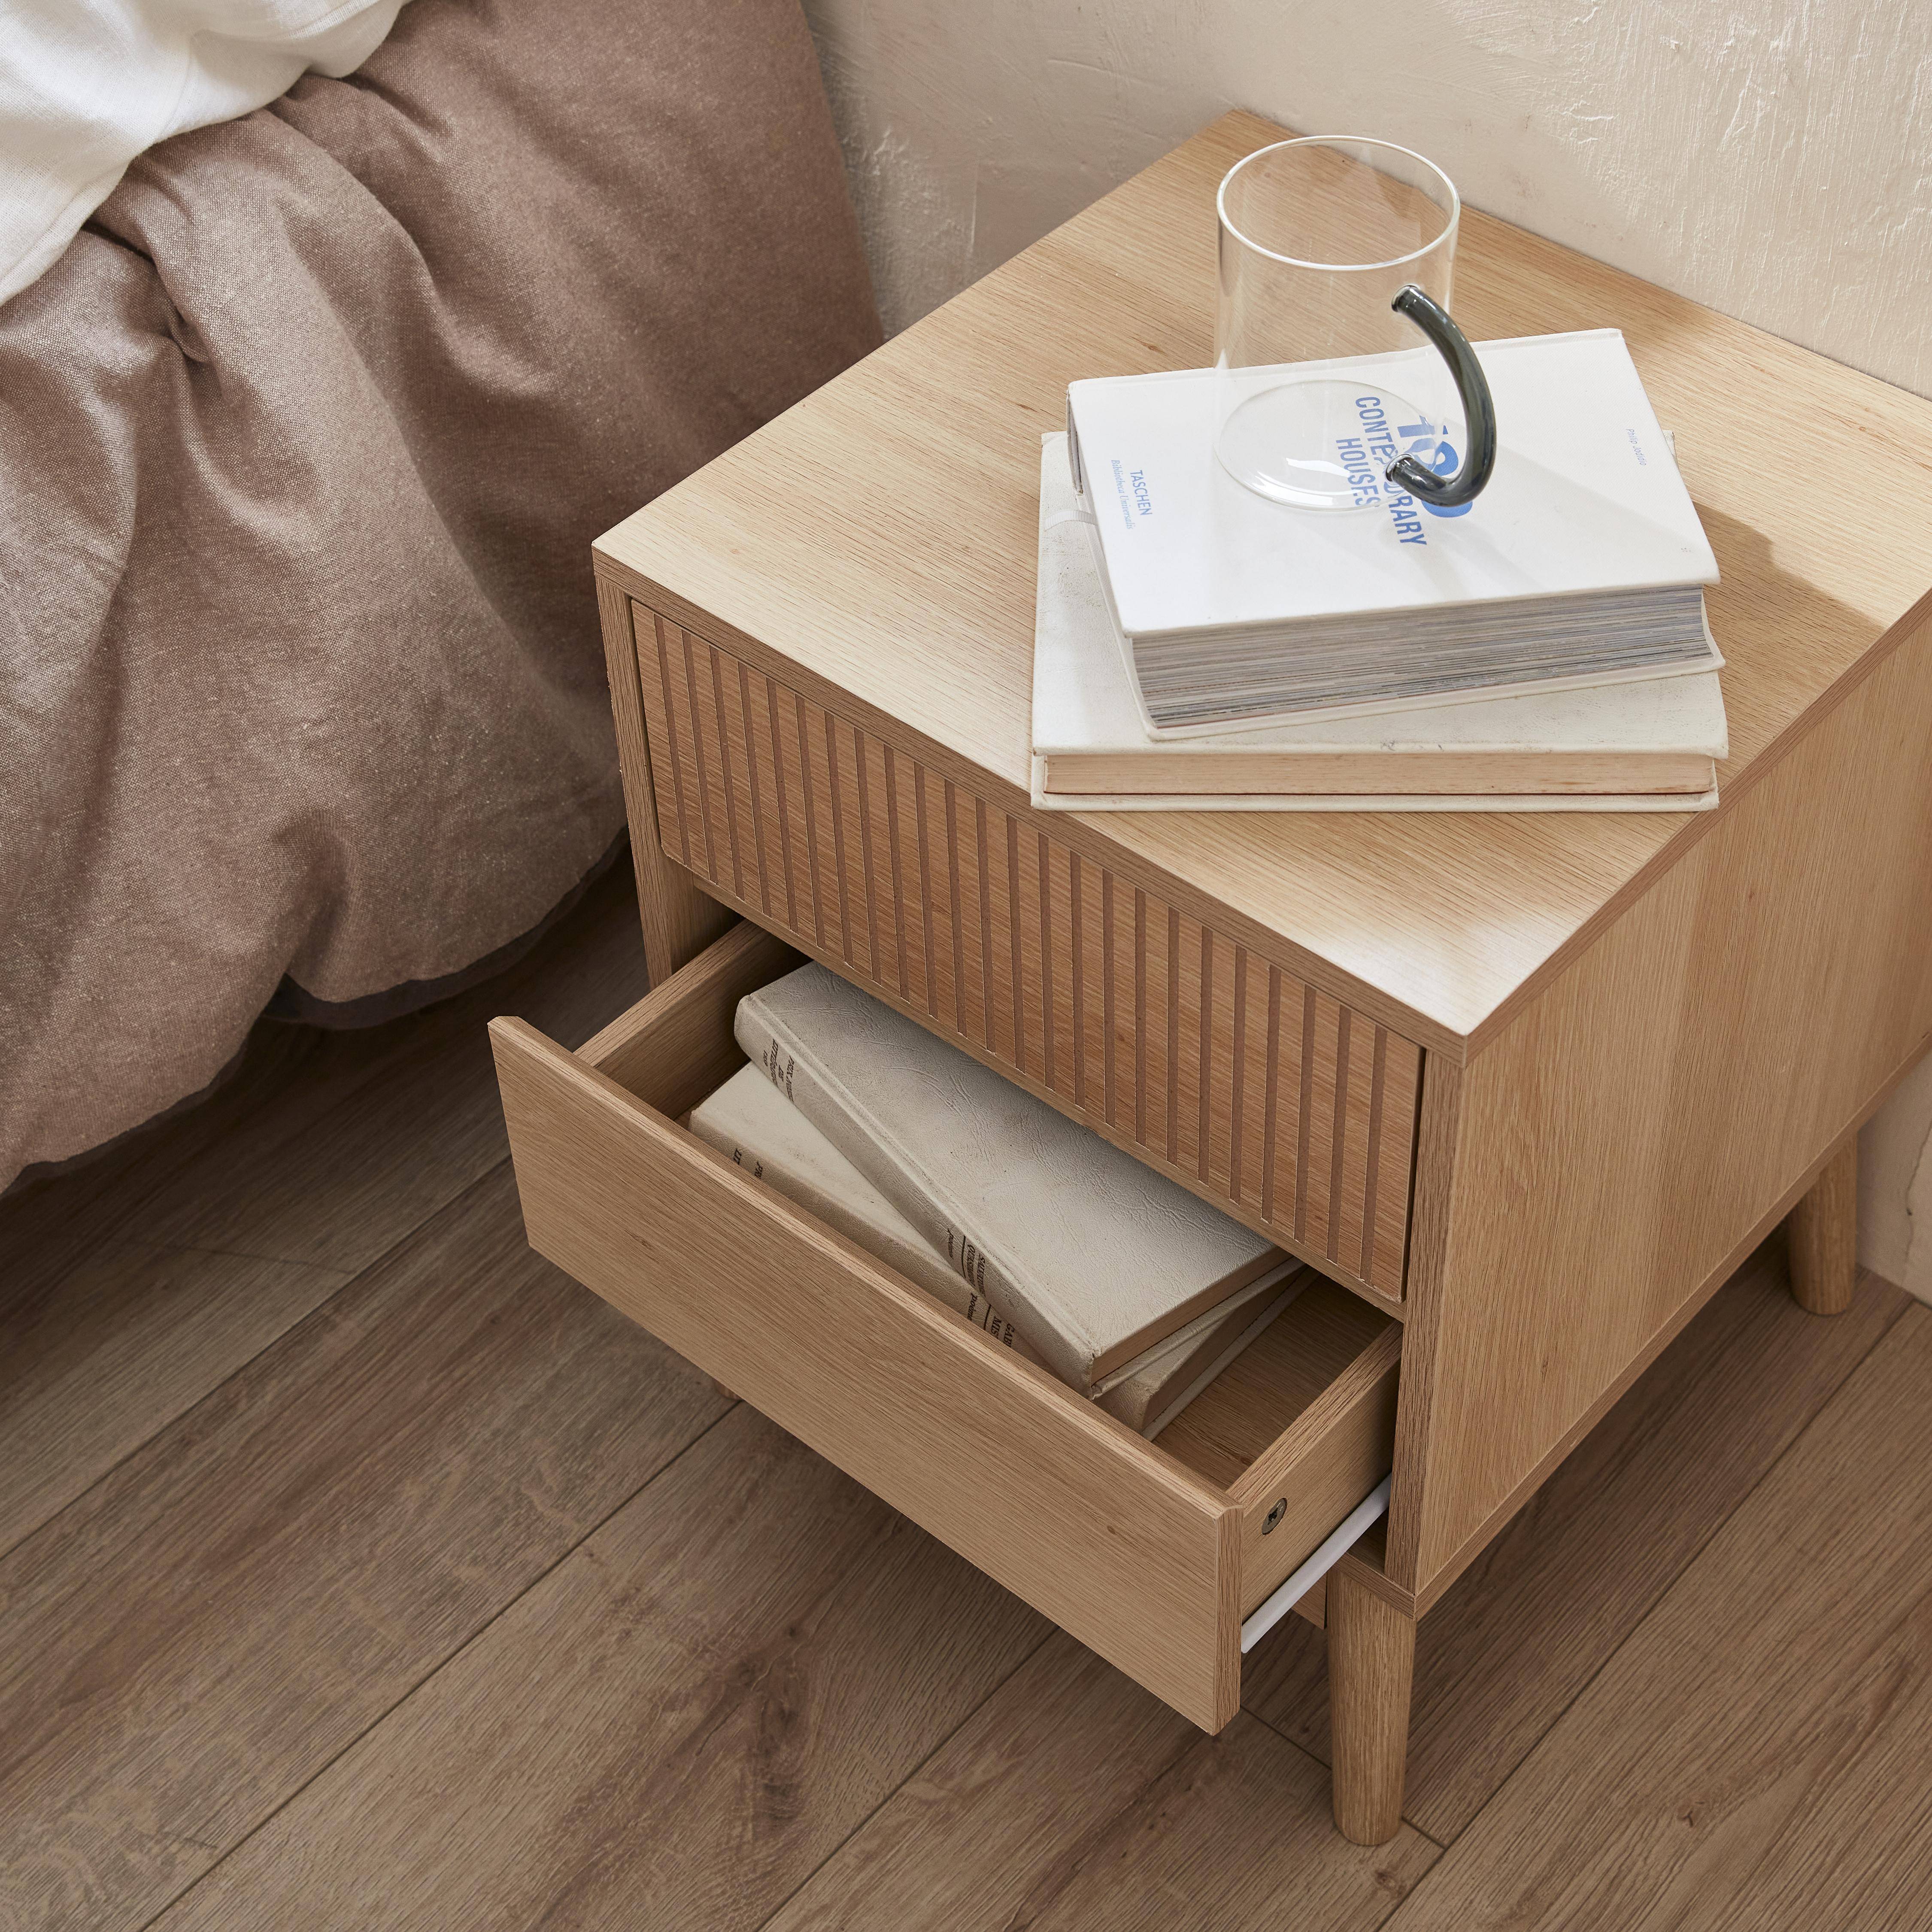 Pair of grooved wooden bedside tables with 2 drawers, 40x39x48cm - Linear - Natural Wood colour Photo3